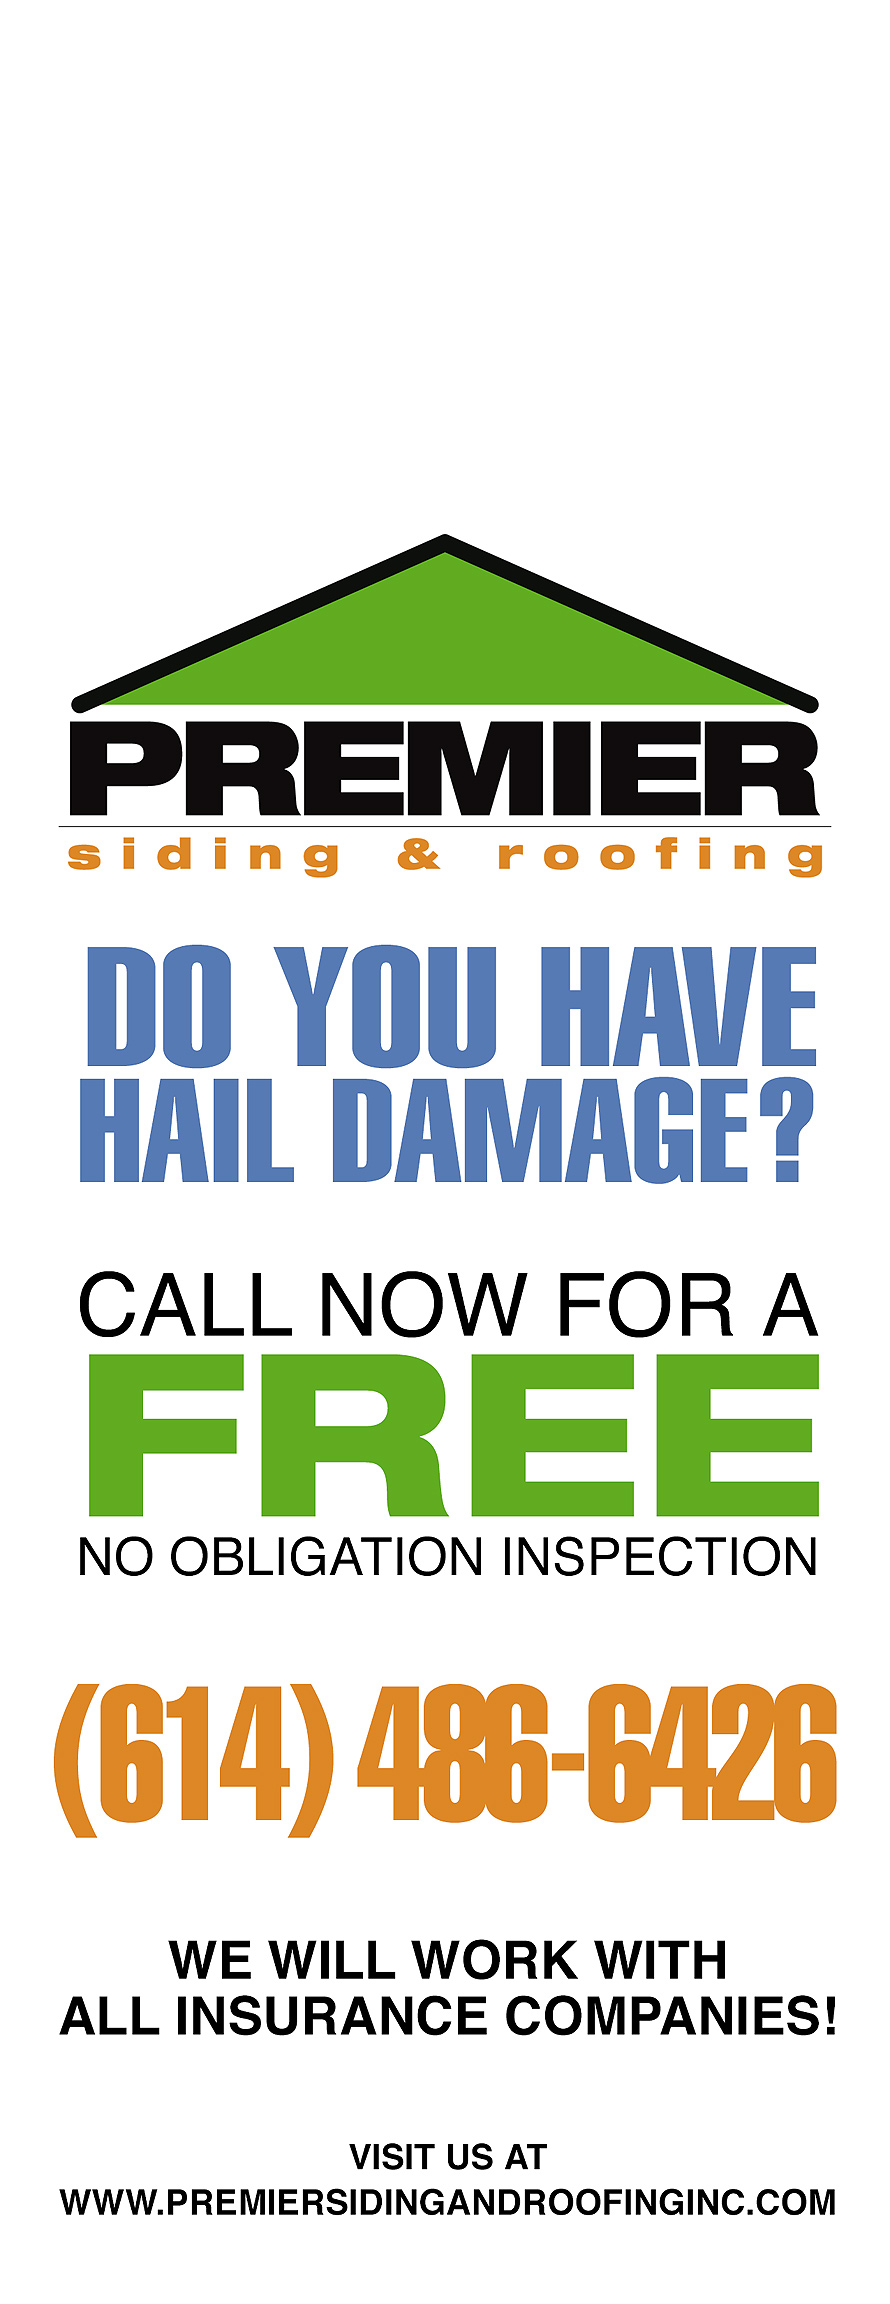 Premier Siding and Roofing